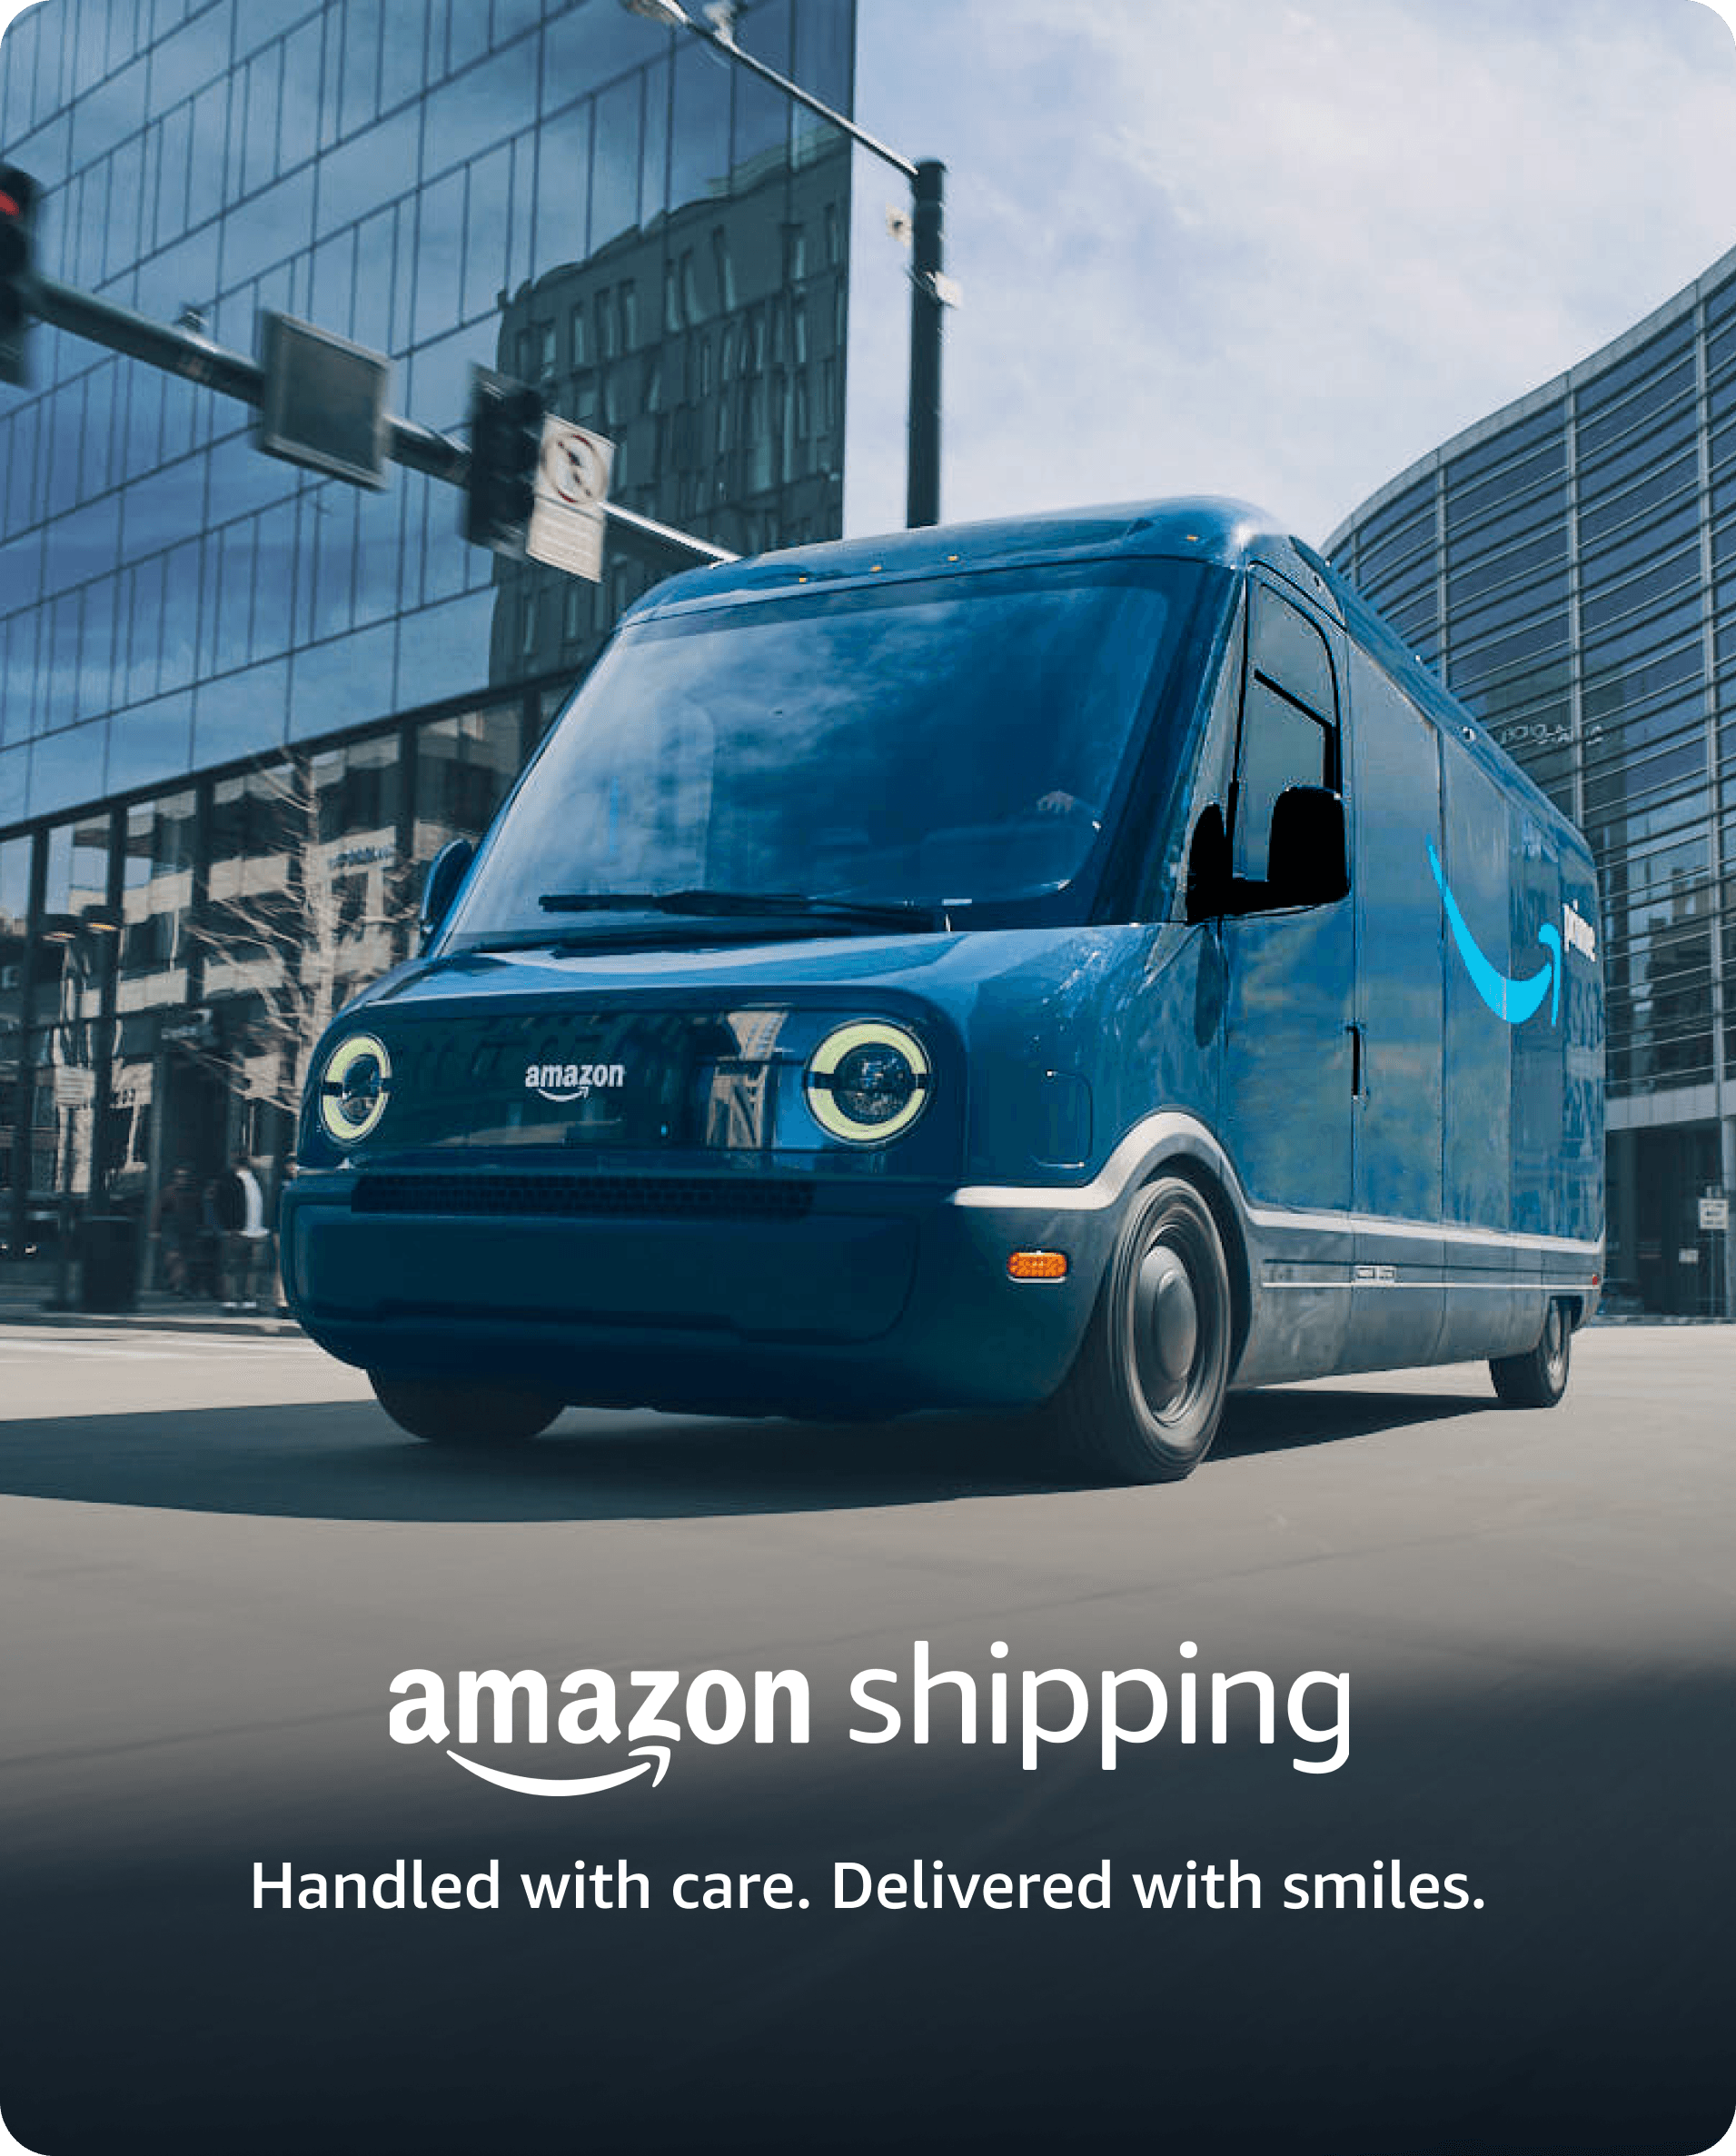 Now available in Veeqo: ship your multichannel orders with Amazon Shipping